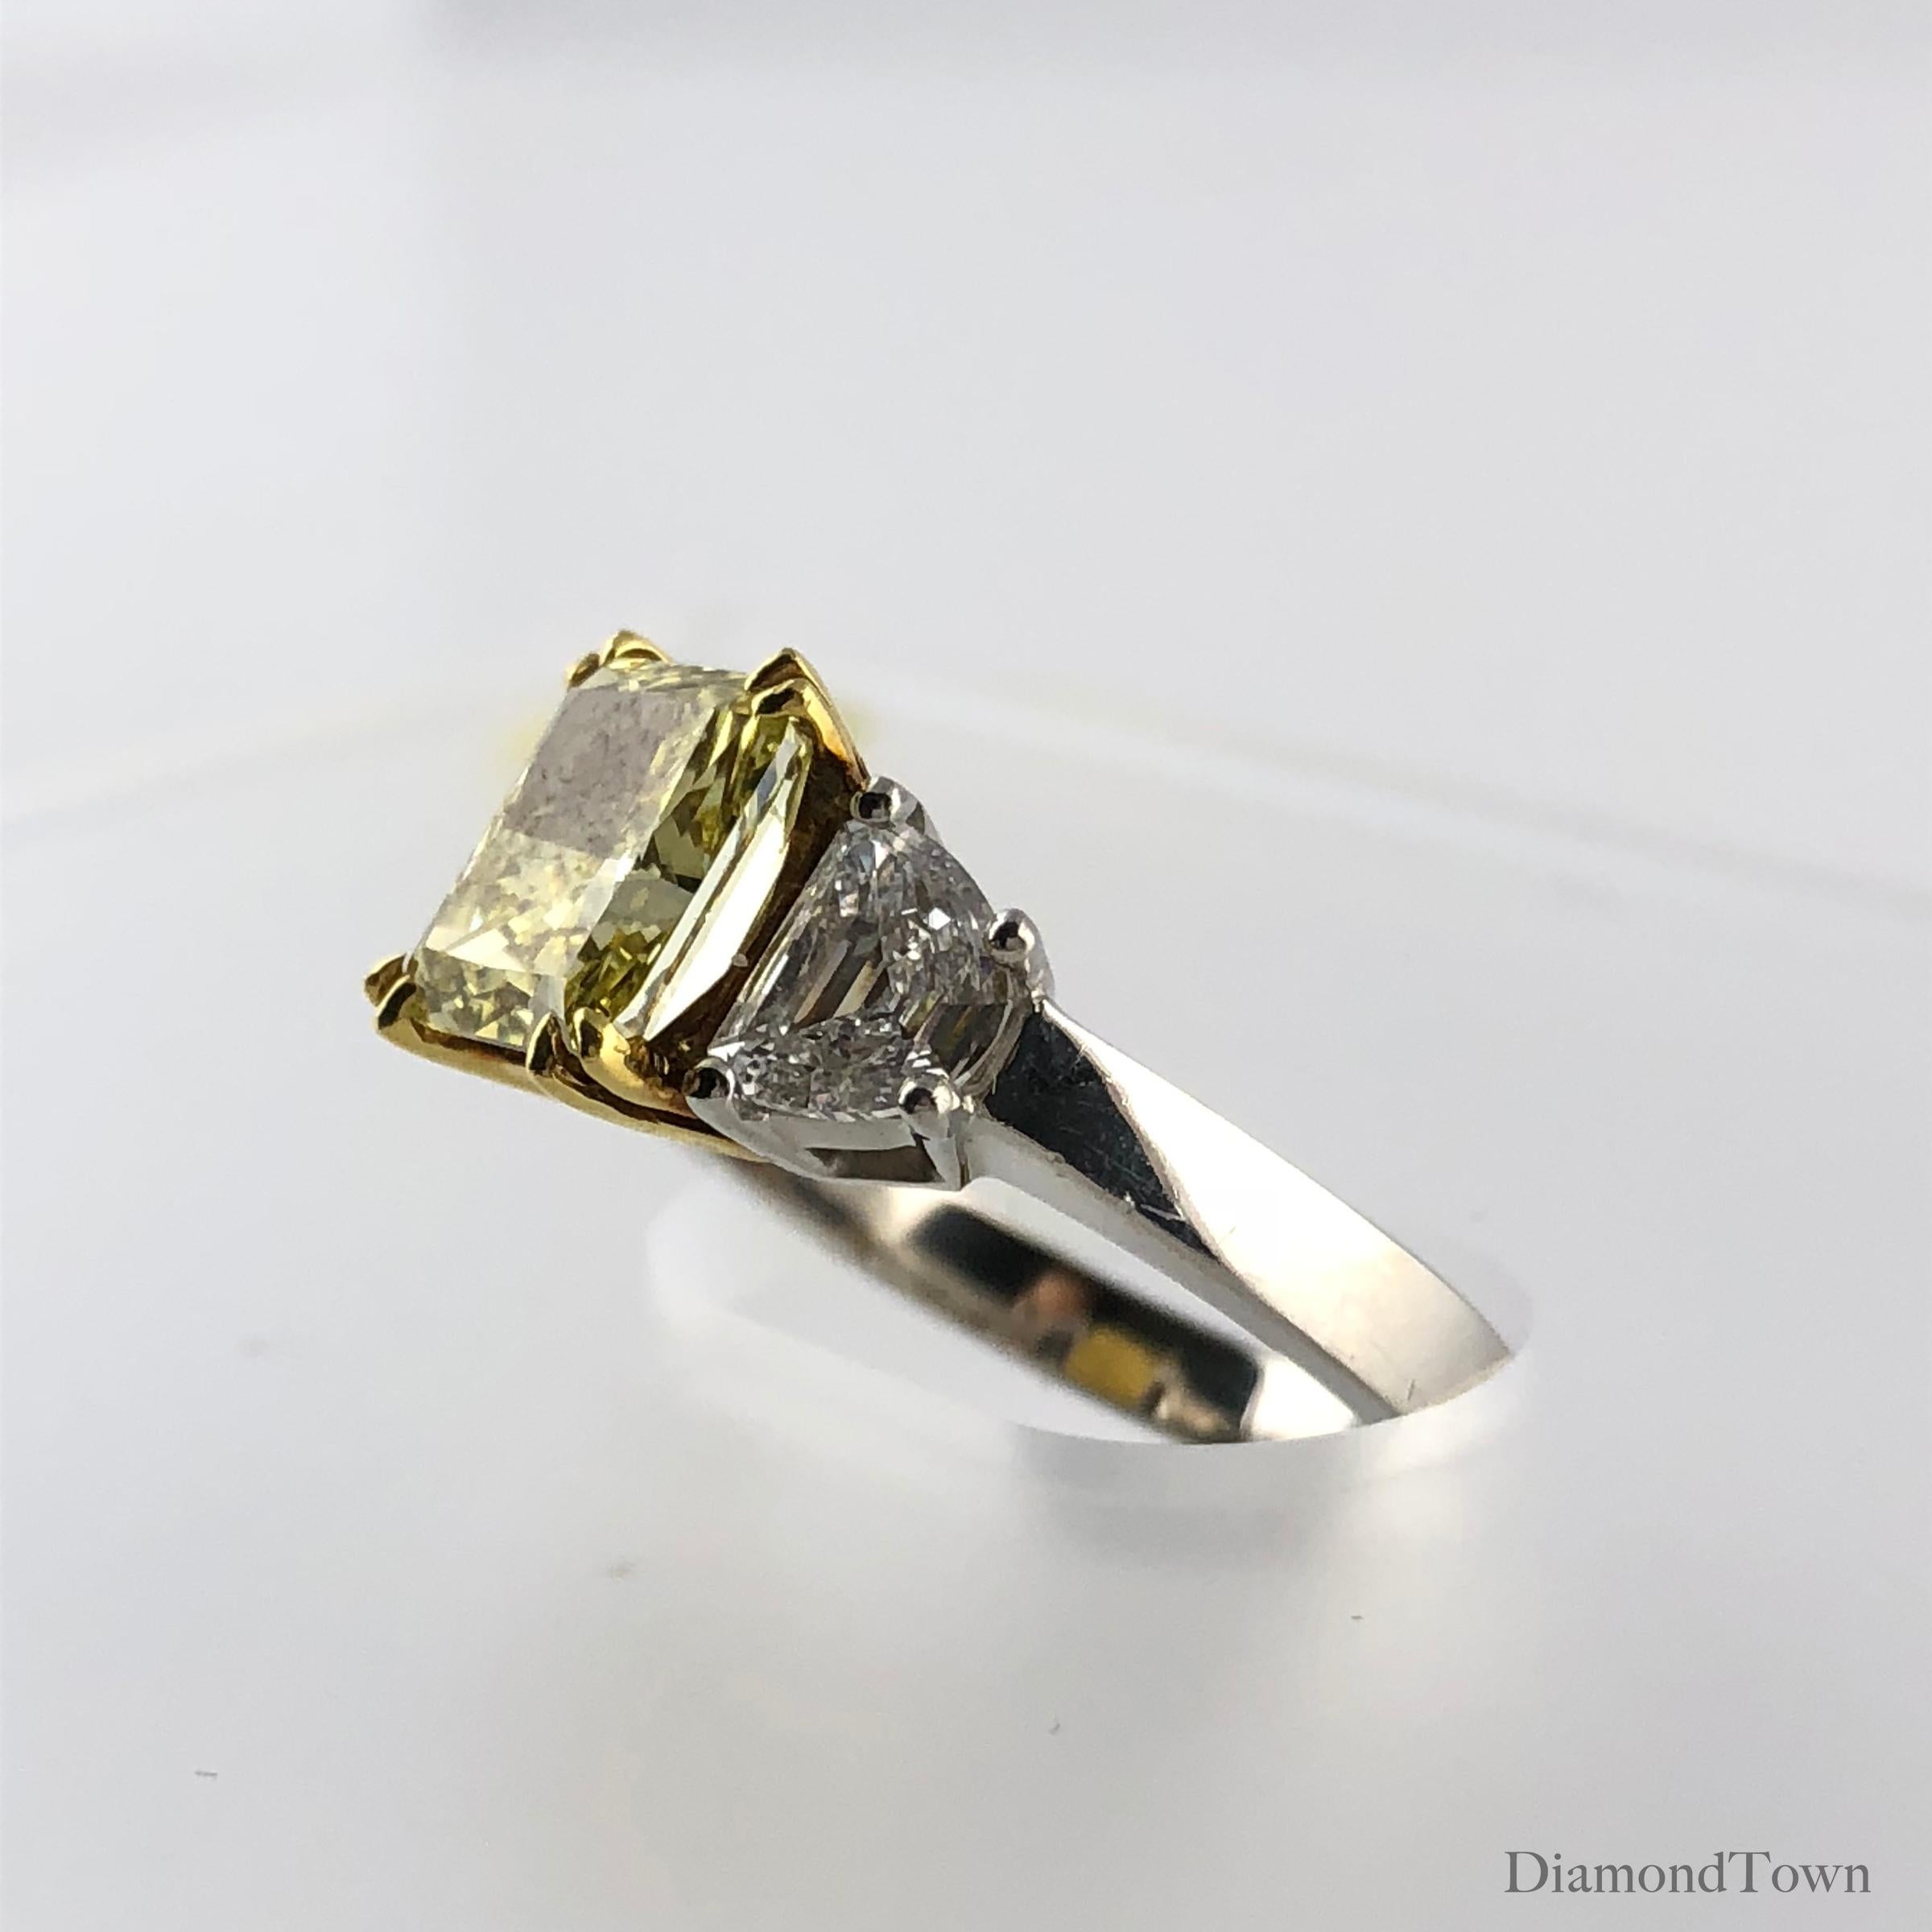 how much is a 9 carat yellow diamond worth